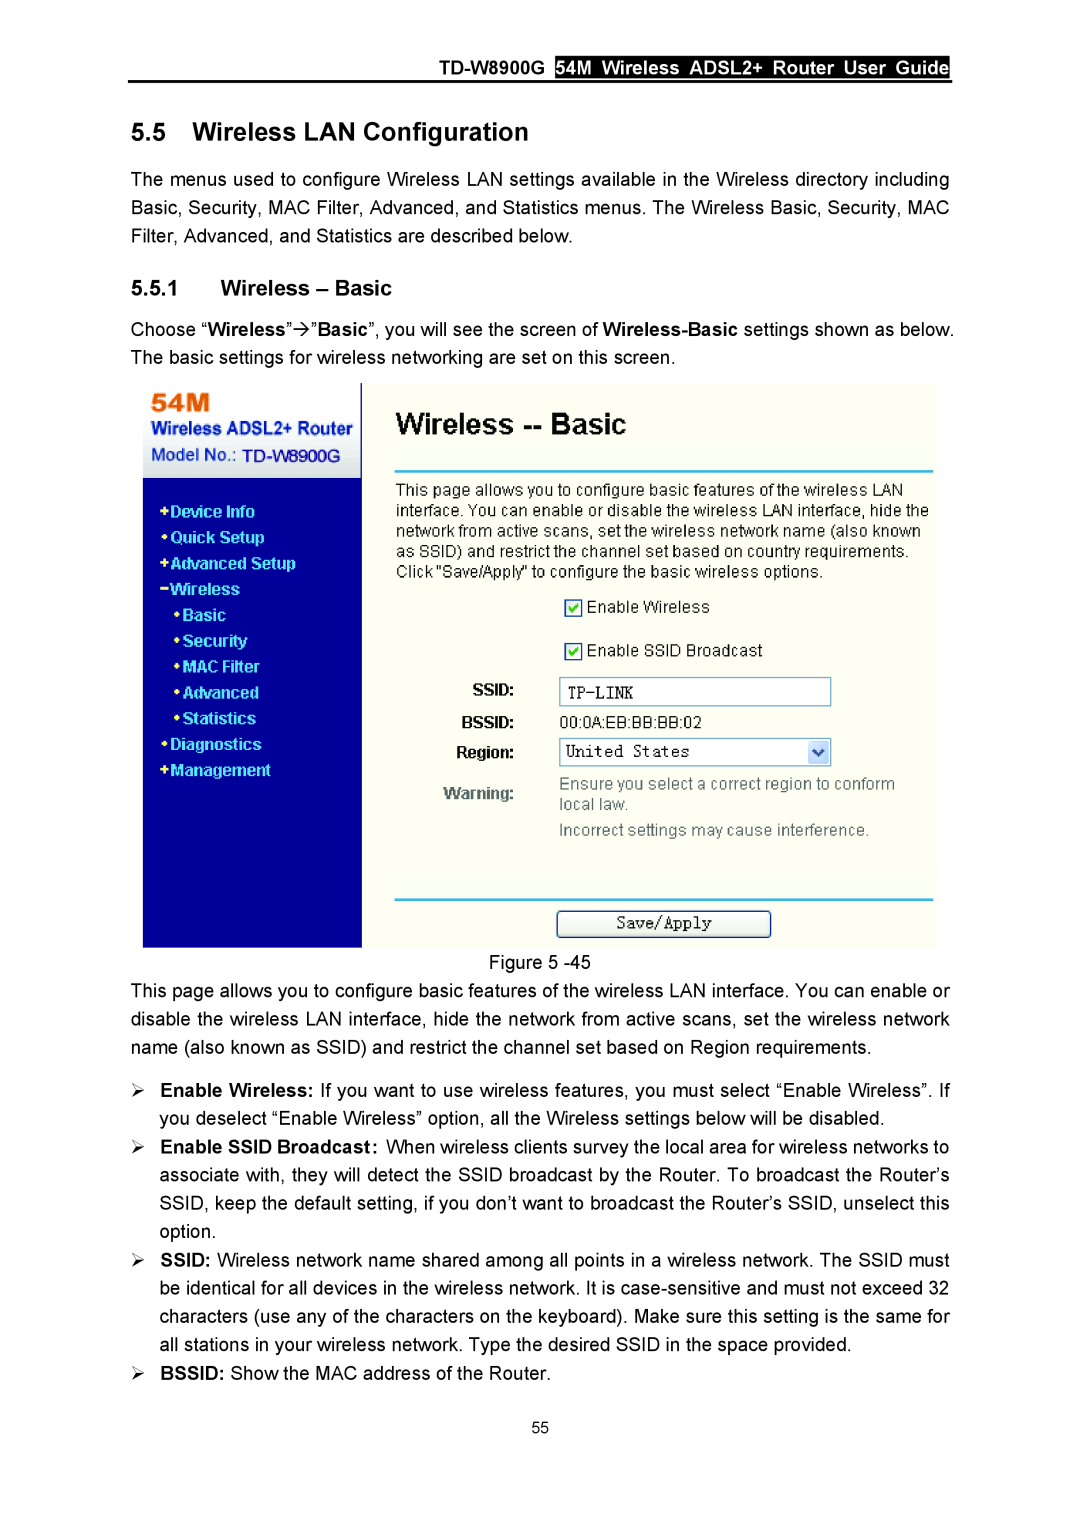 TP-Link manual Wireless LAN Configuration, Wireless - Basic, TD-W8900G 54M Wireless ADSL2+ Router User Guide 